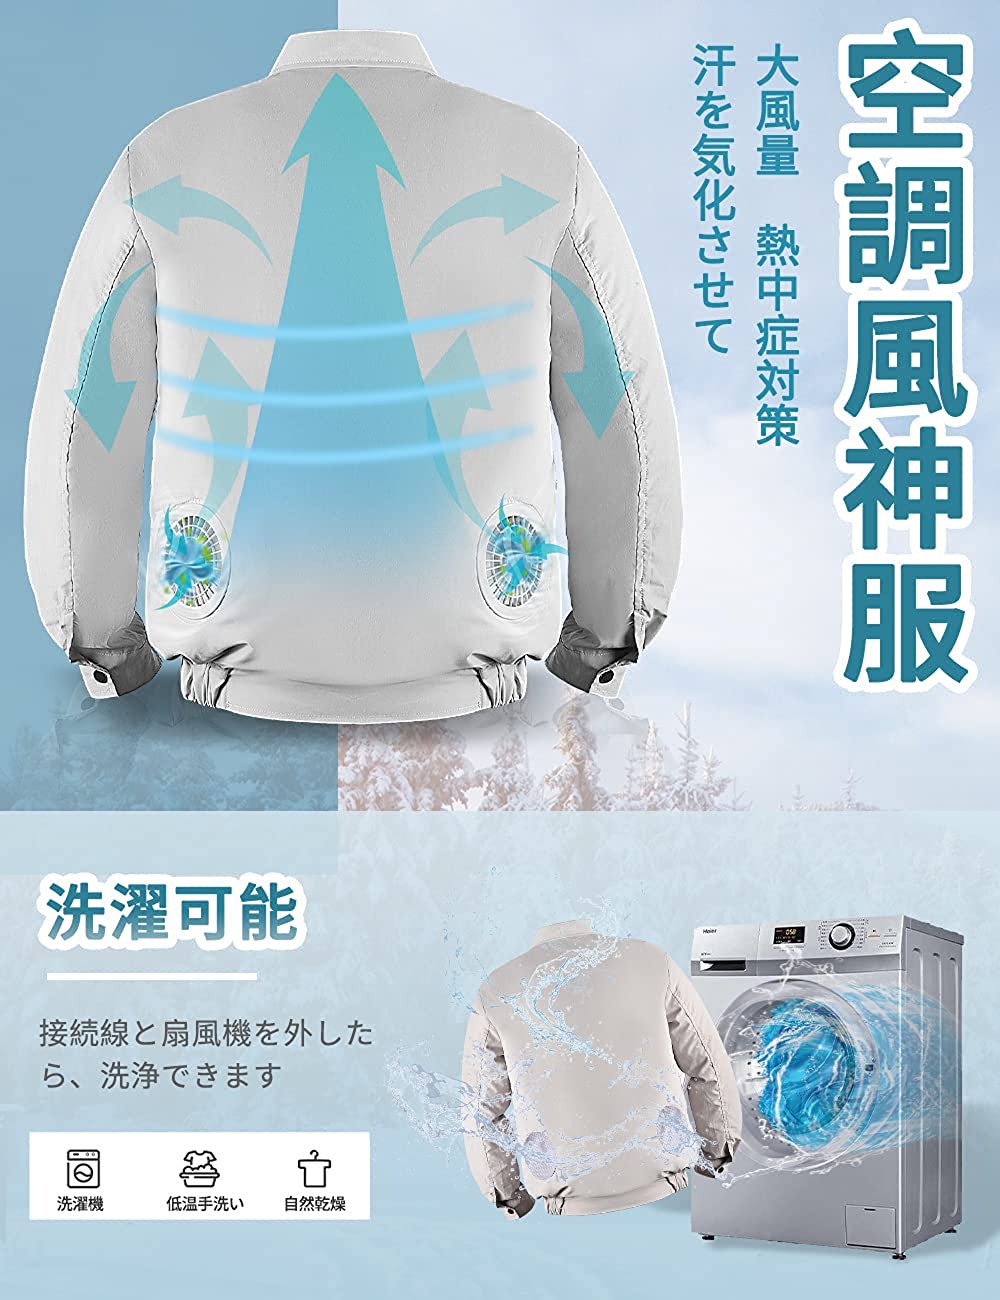 <transcy>AISFA air-conditioned clothes fishing outdoor unisex summer autumn heat measures</transcy>